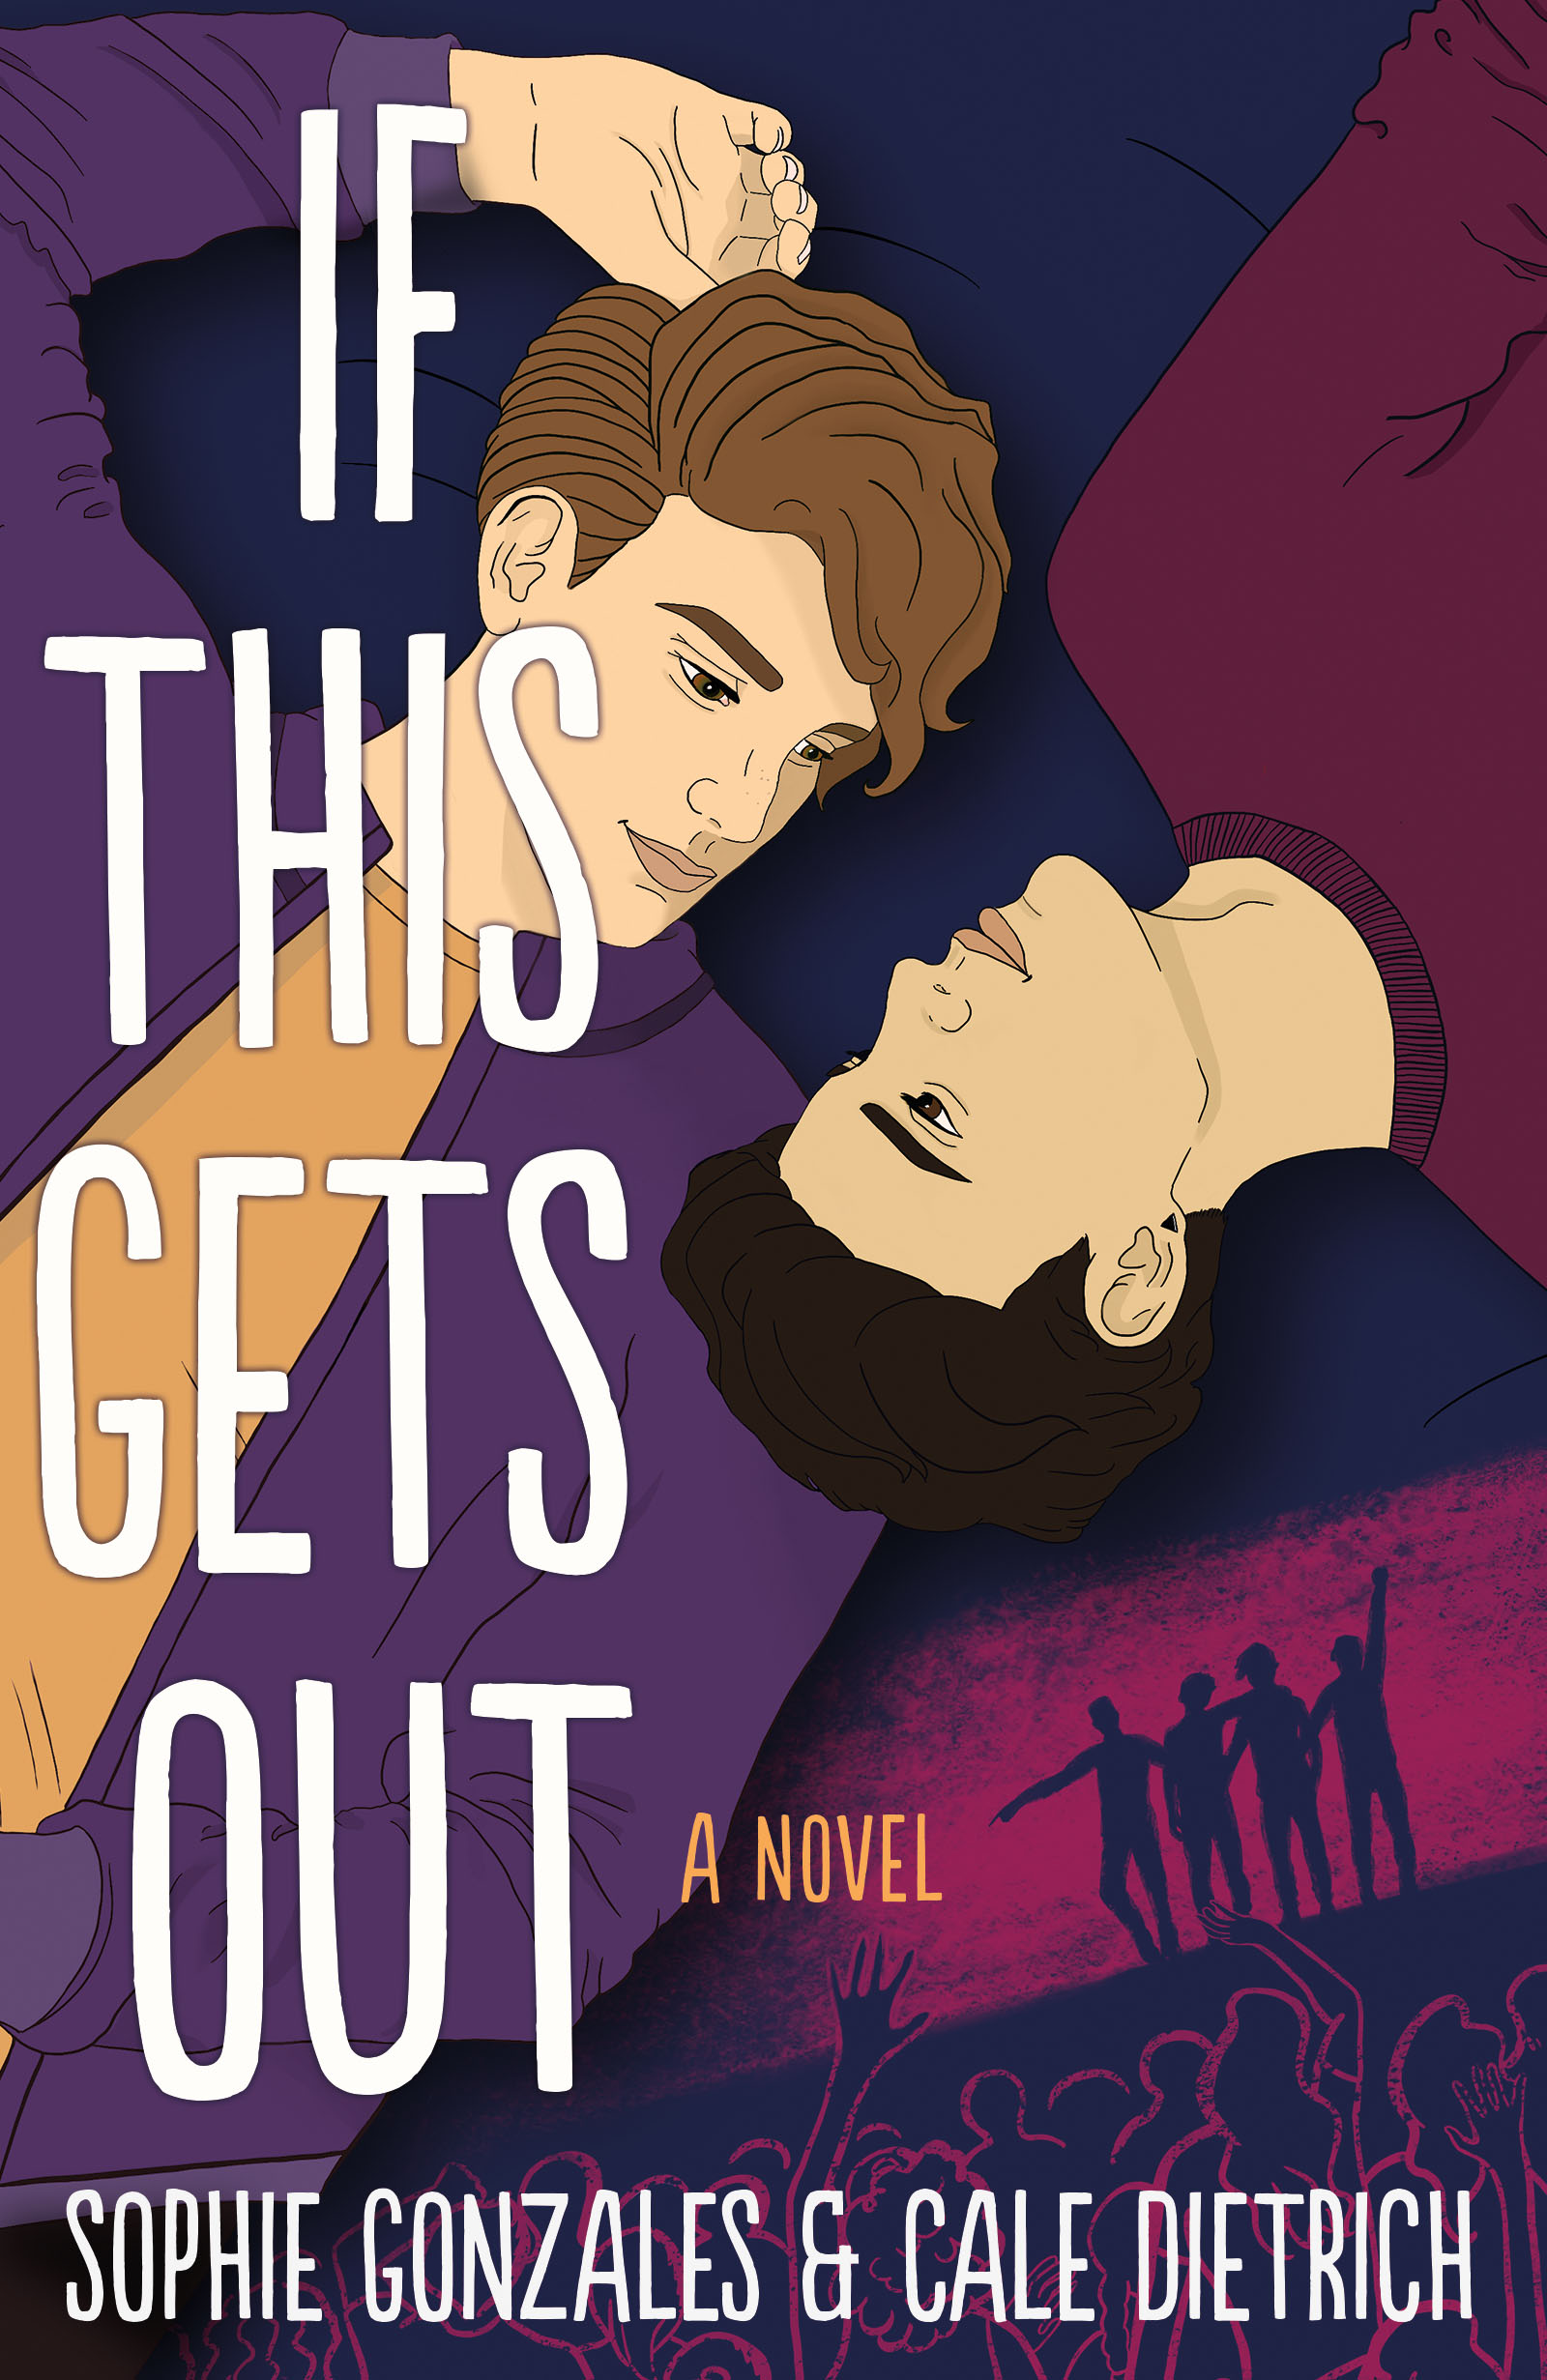 Sophie Gonzales, Cale Dietrich: If This Gets Out (Hardcover, 2021, Wednesday Books)